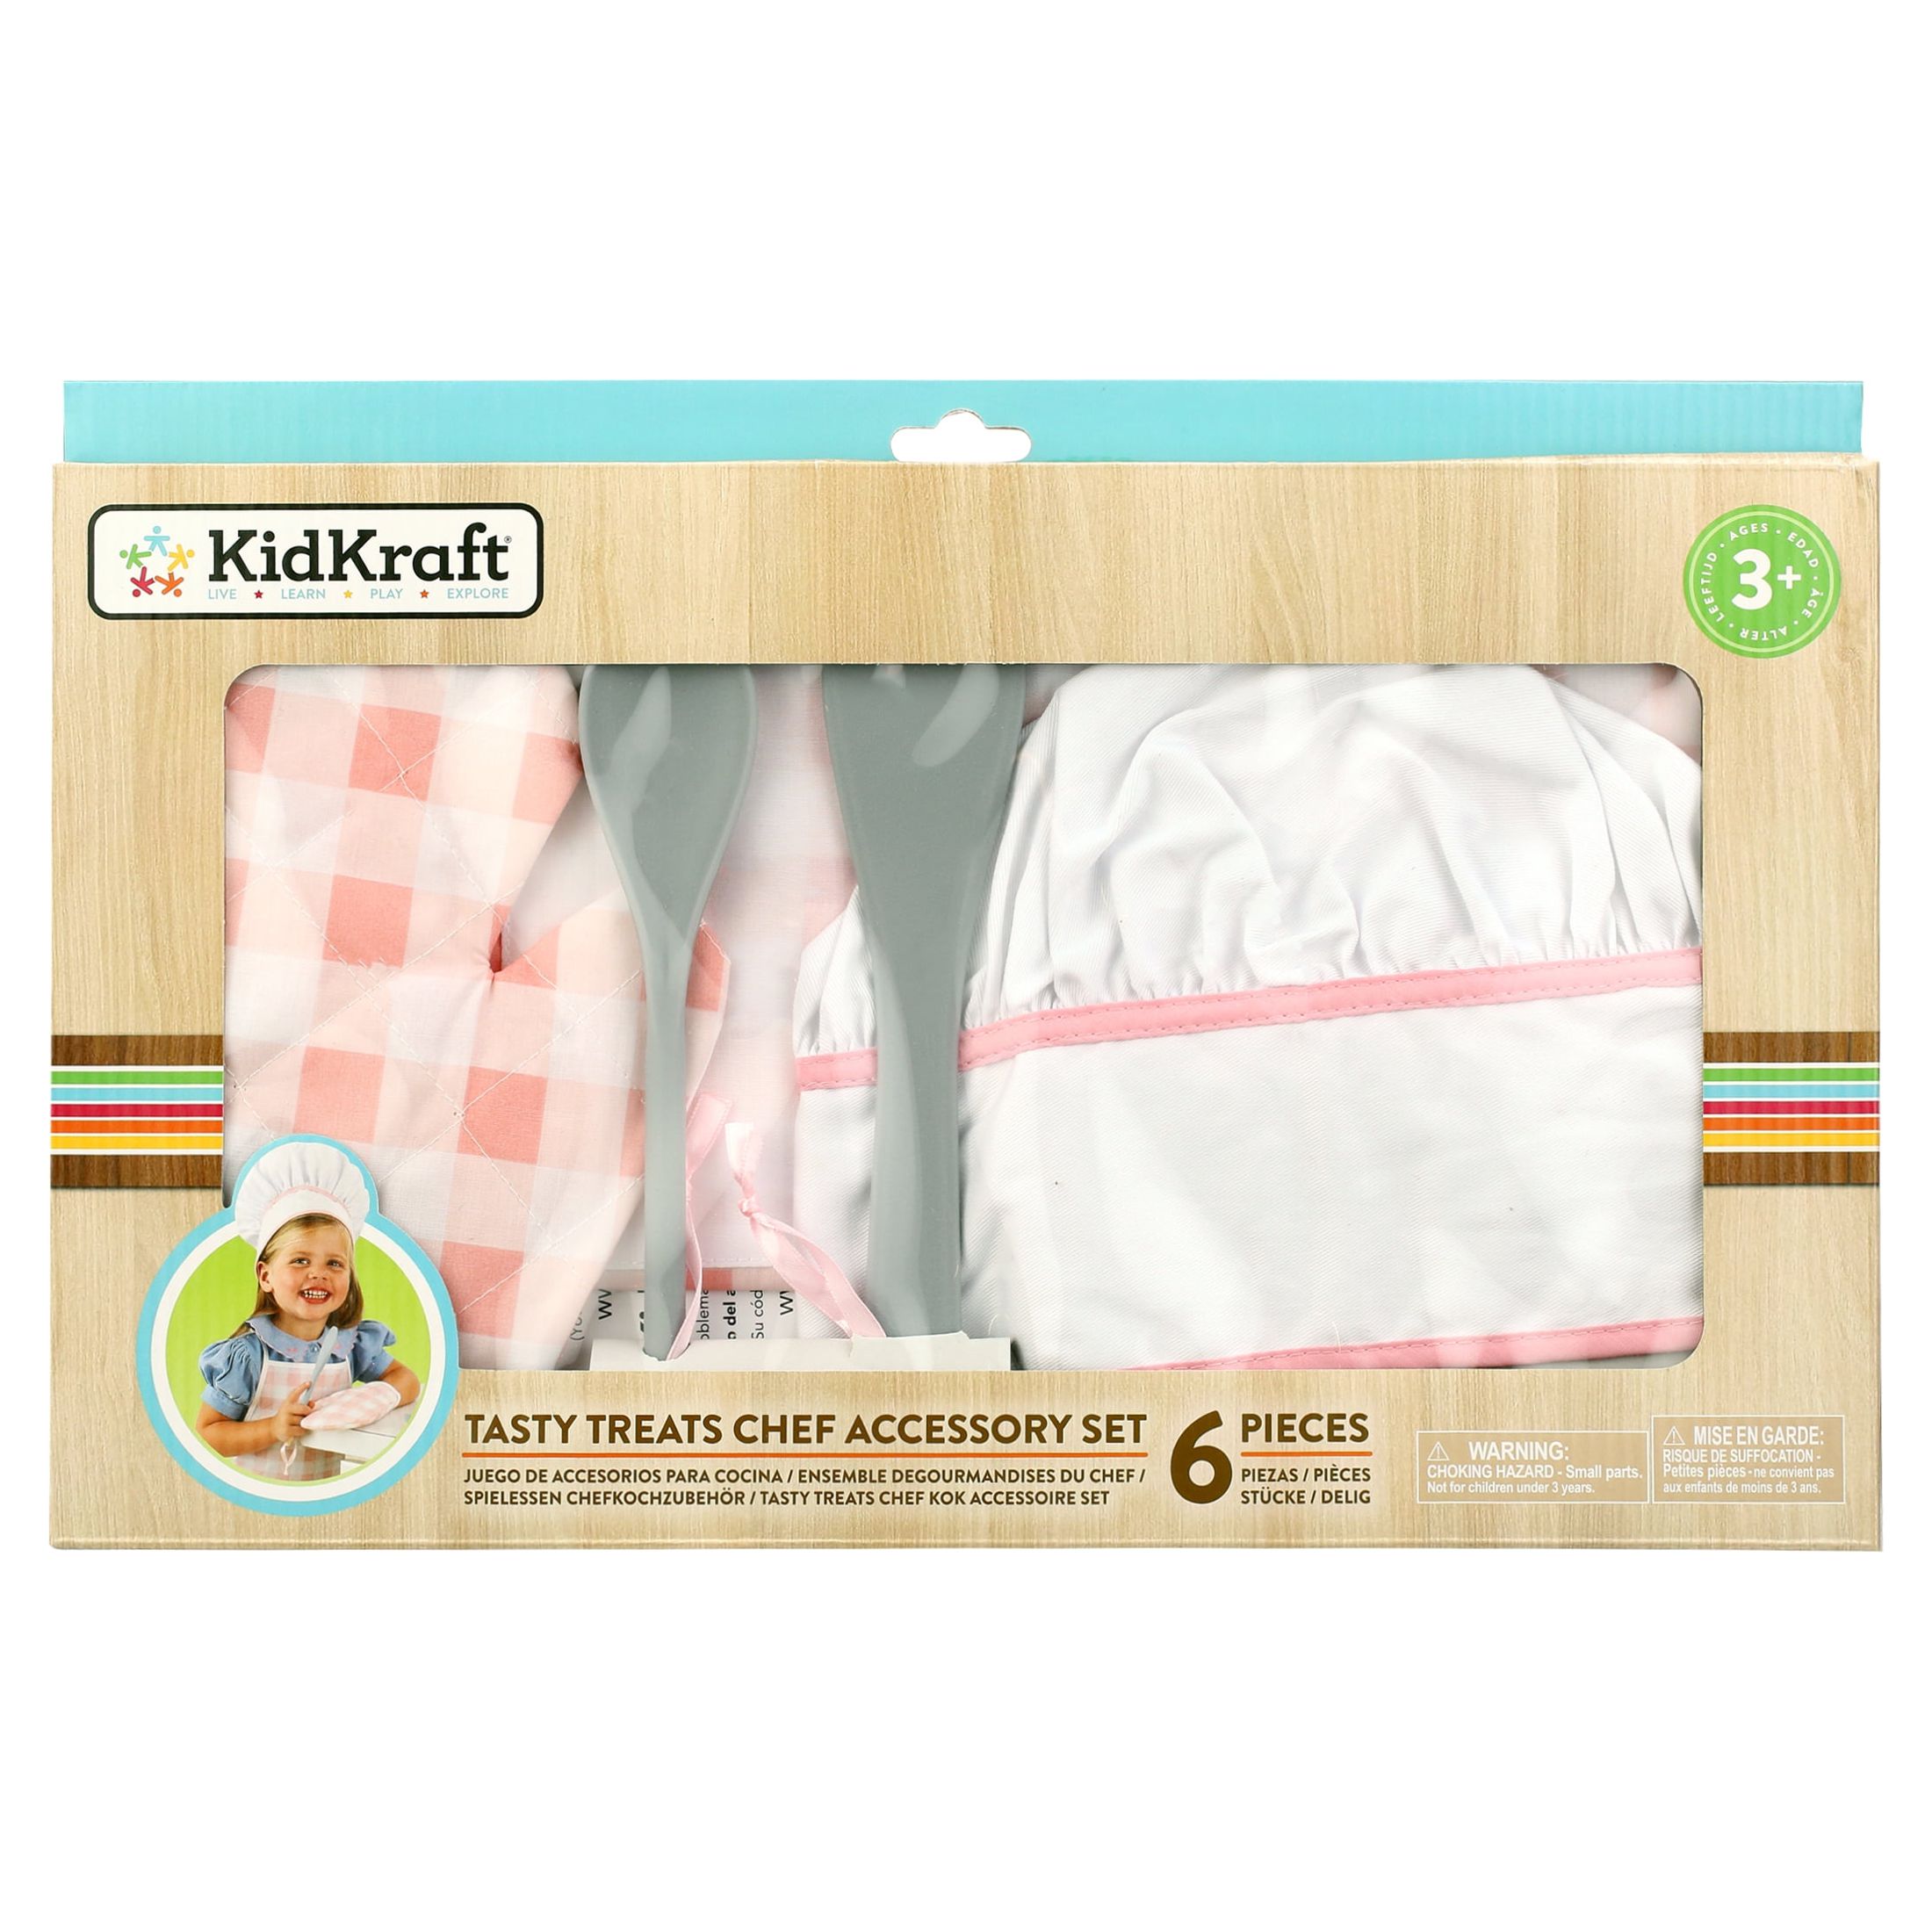 KidKraft Tasty Treats Chef Apron, Hat and Accessory Set for Kids, Pink - image 1 of 8